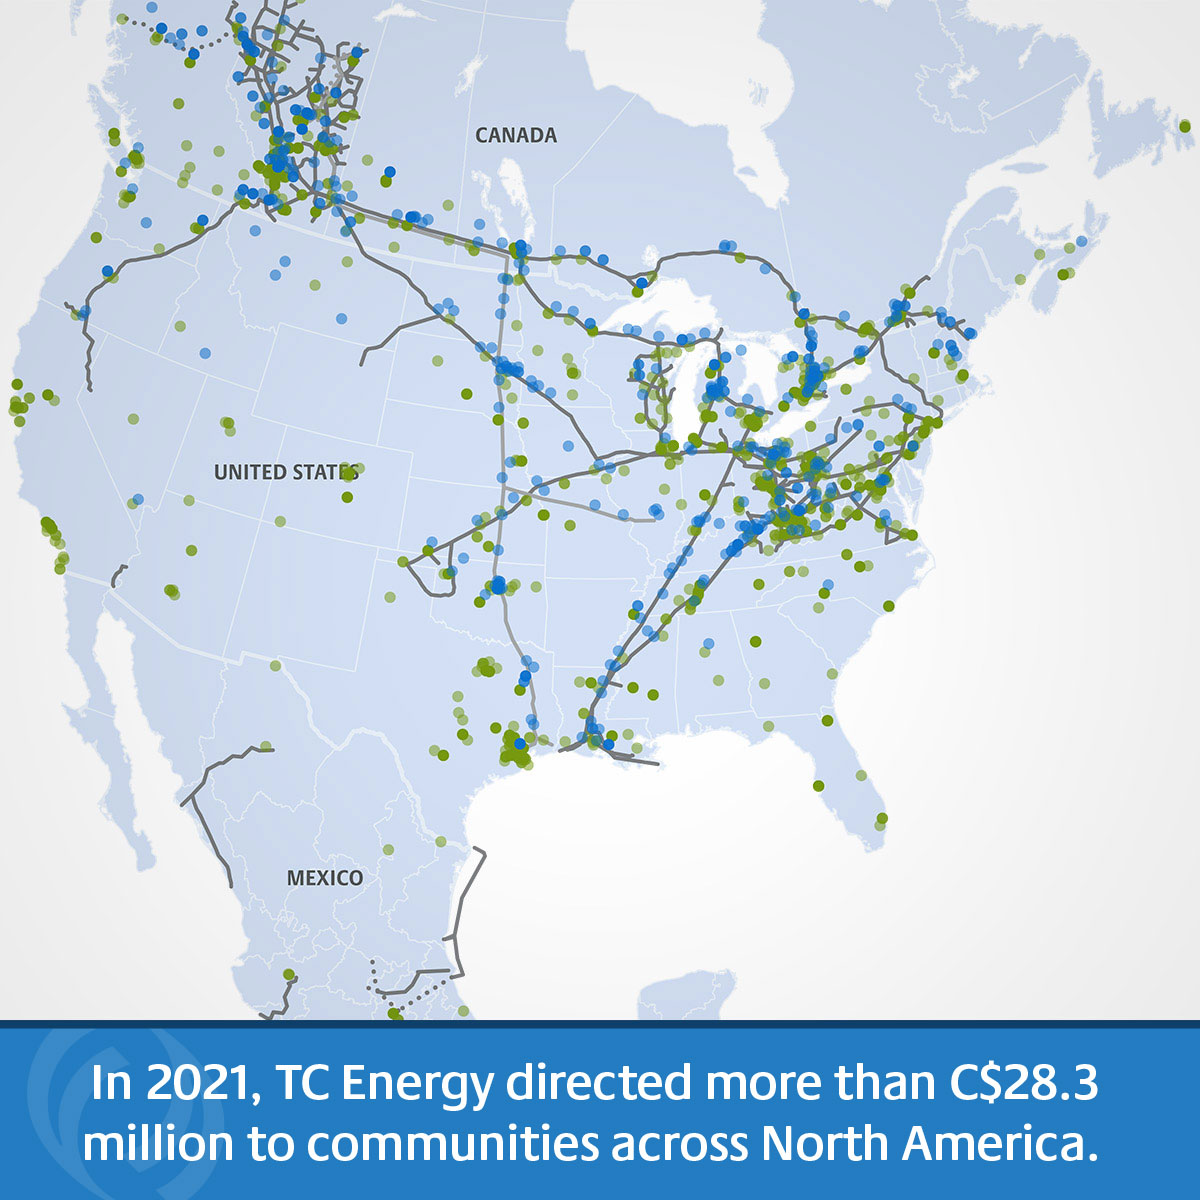 In 2021, TC Energy directed more than C$28.3 million to communities across North America